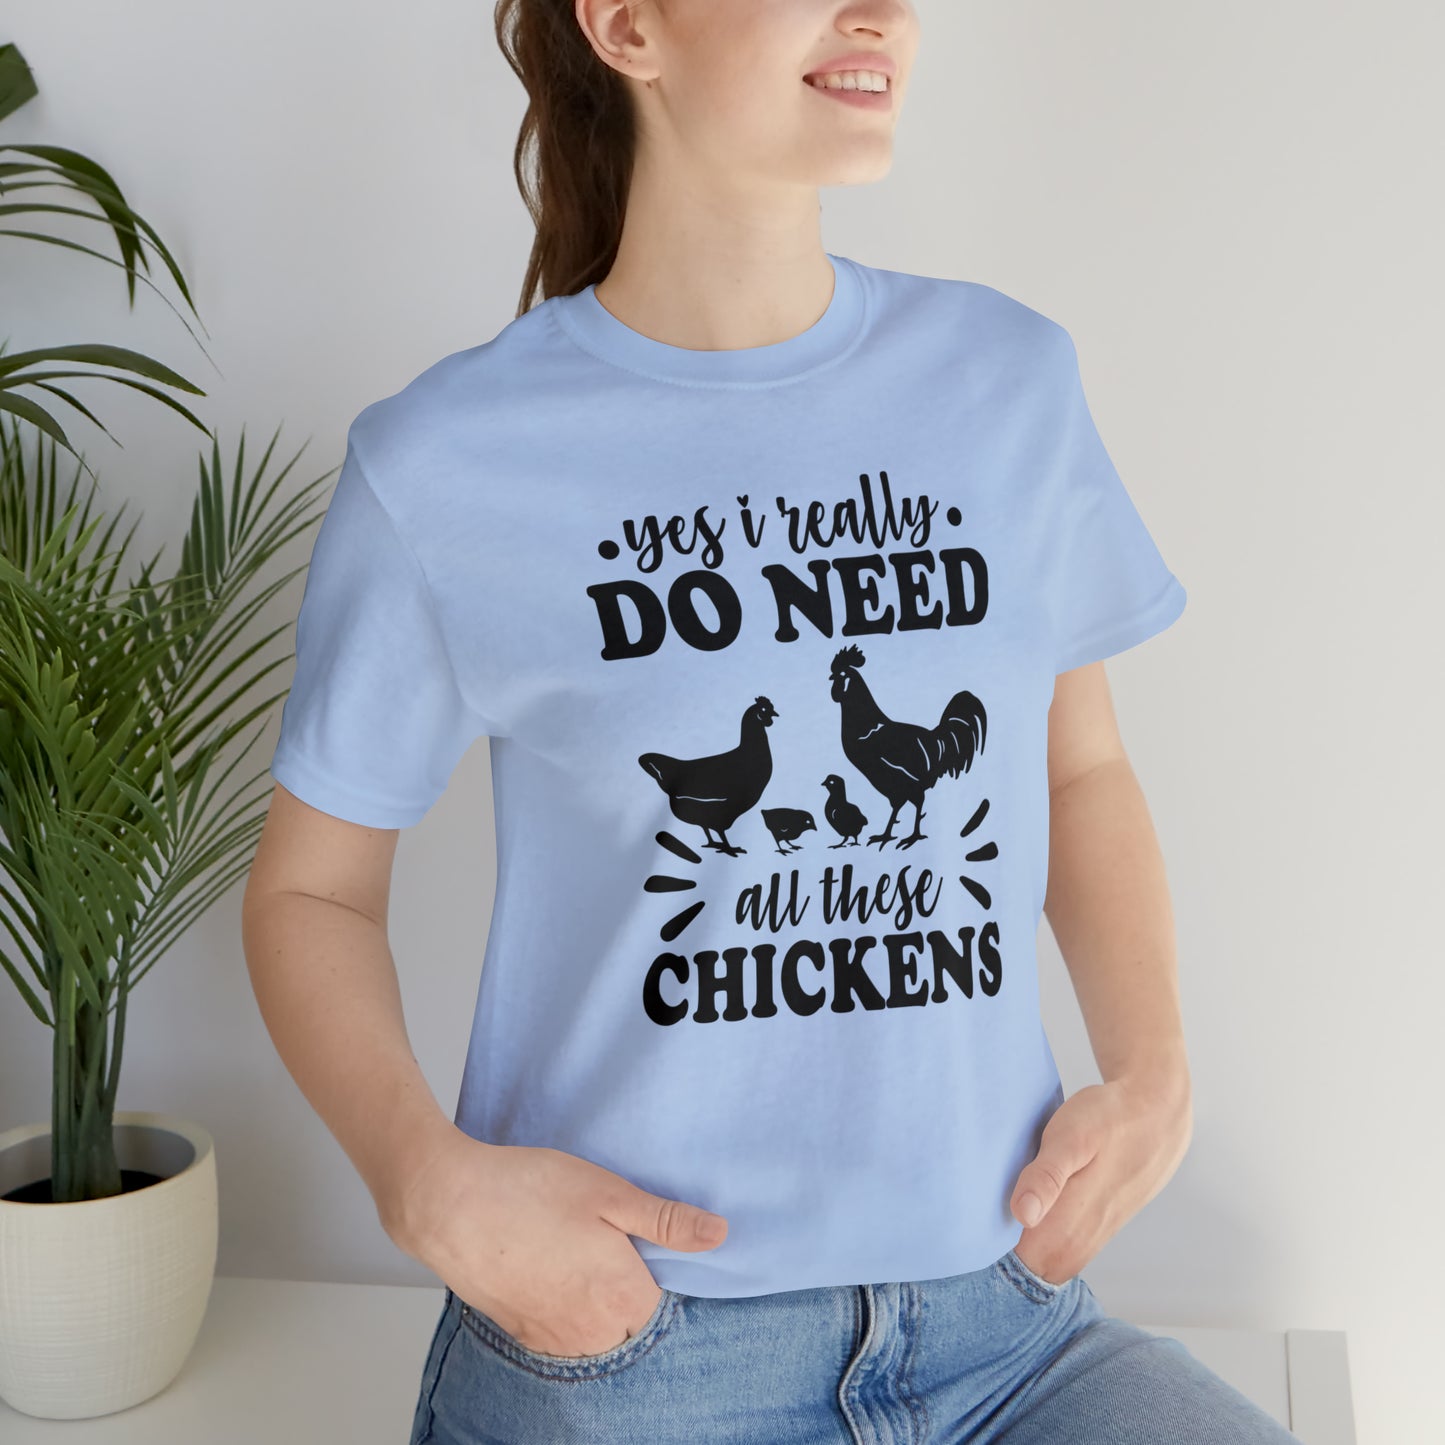 Yes I Really Do Need All These Chickens Short Sleeve T-shirt